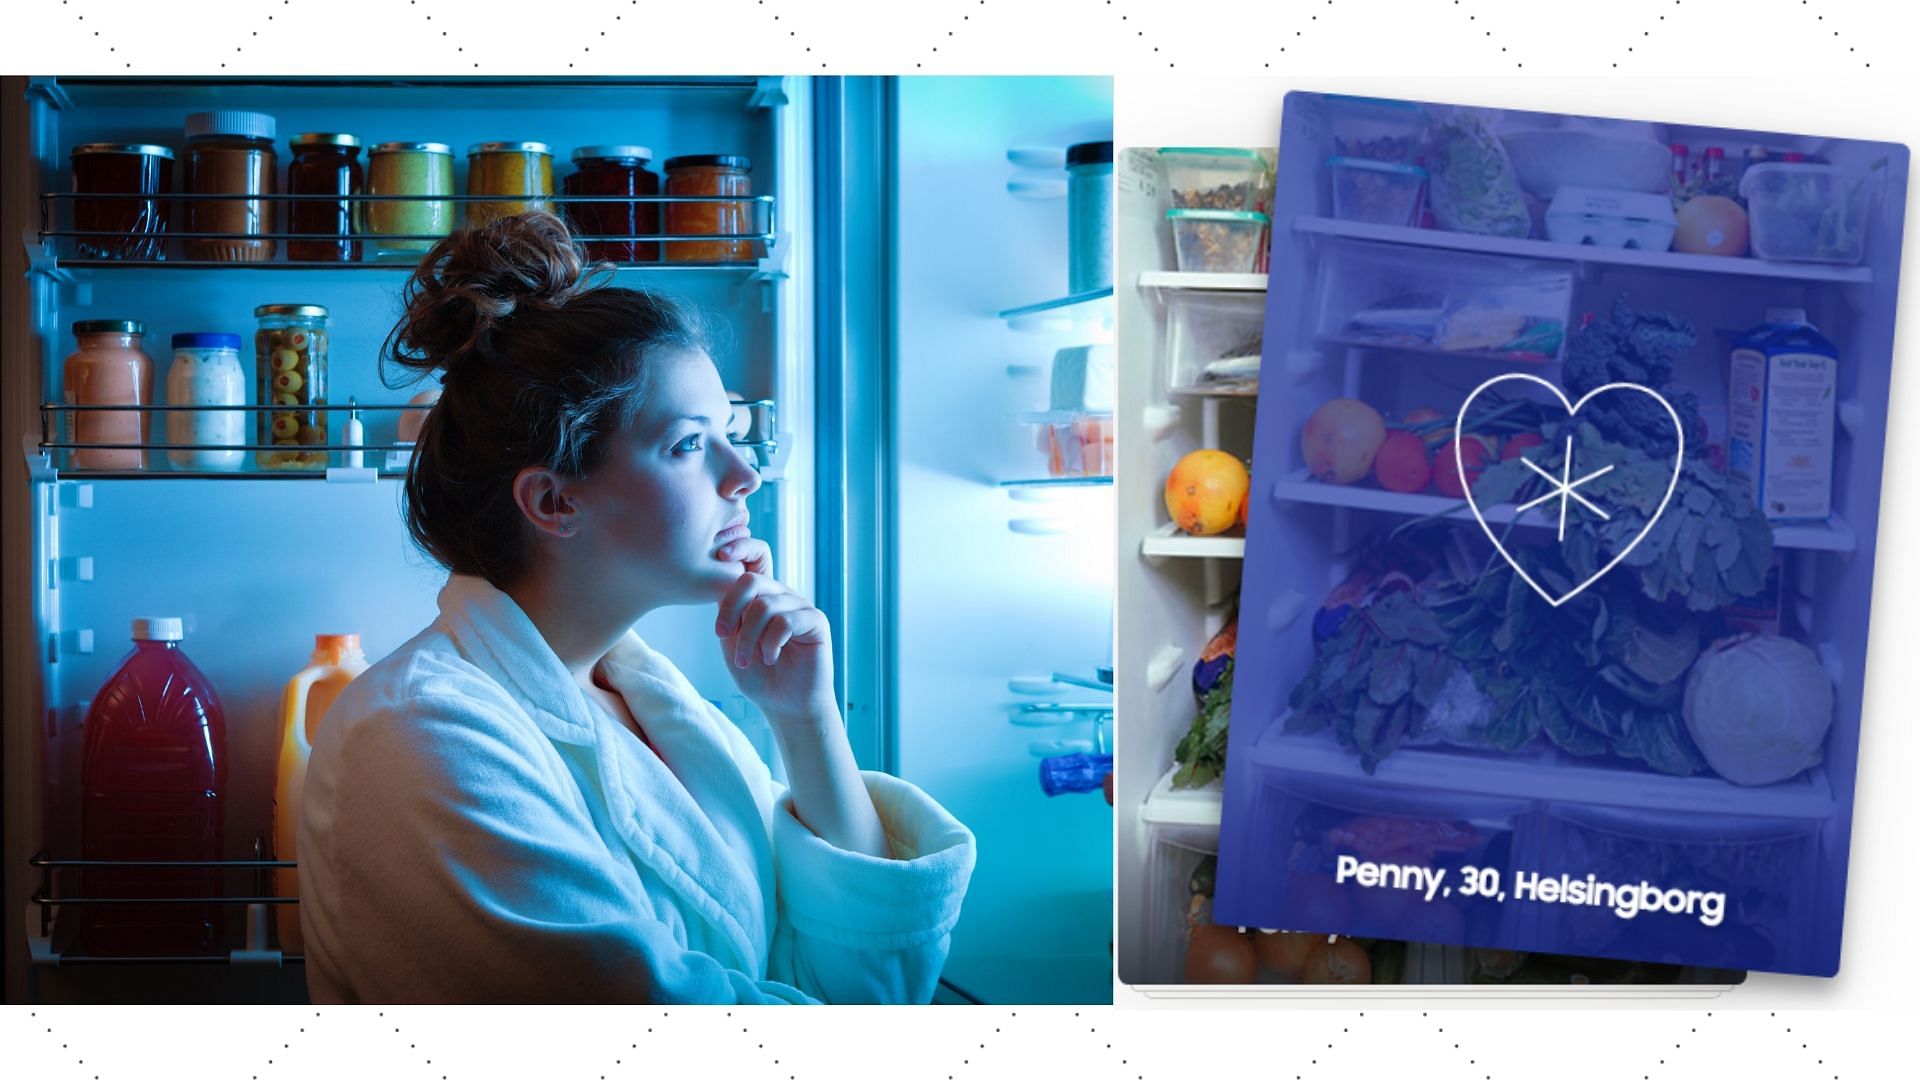 This app lets you find your perfect match based on the contents of your fridge!